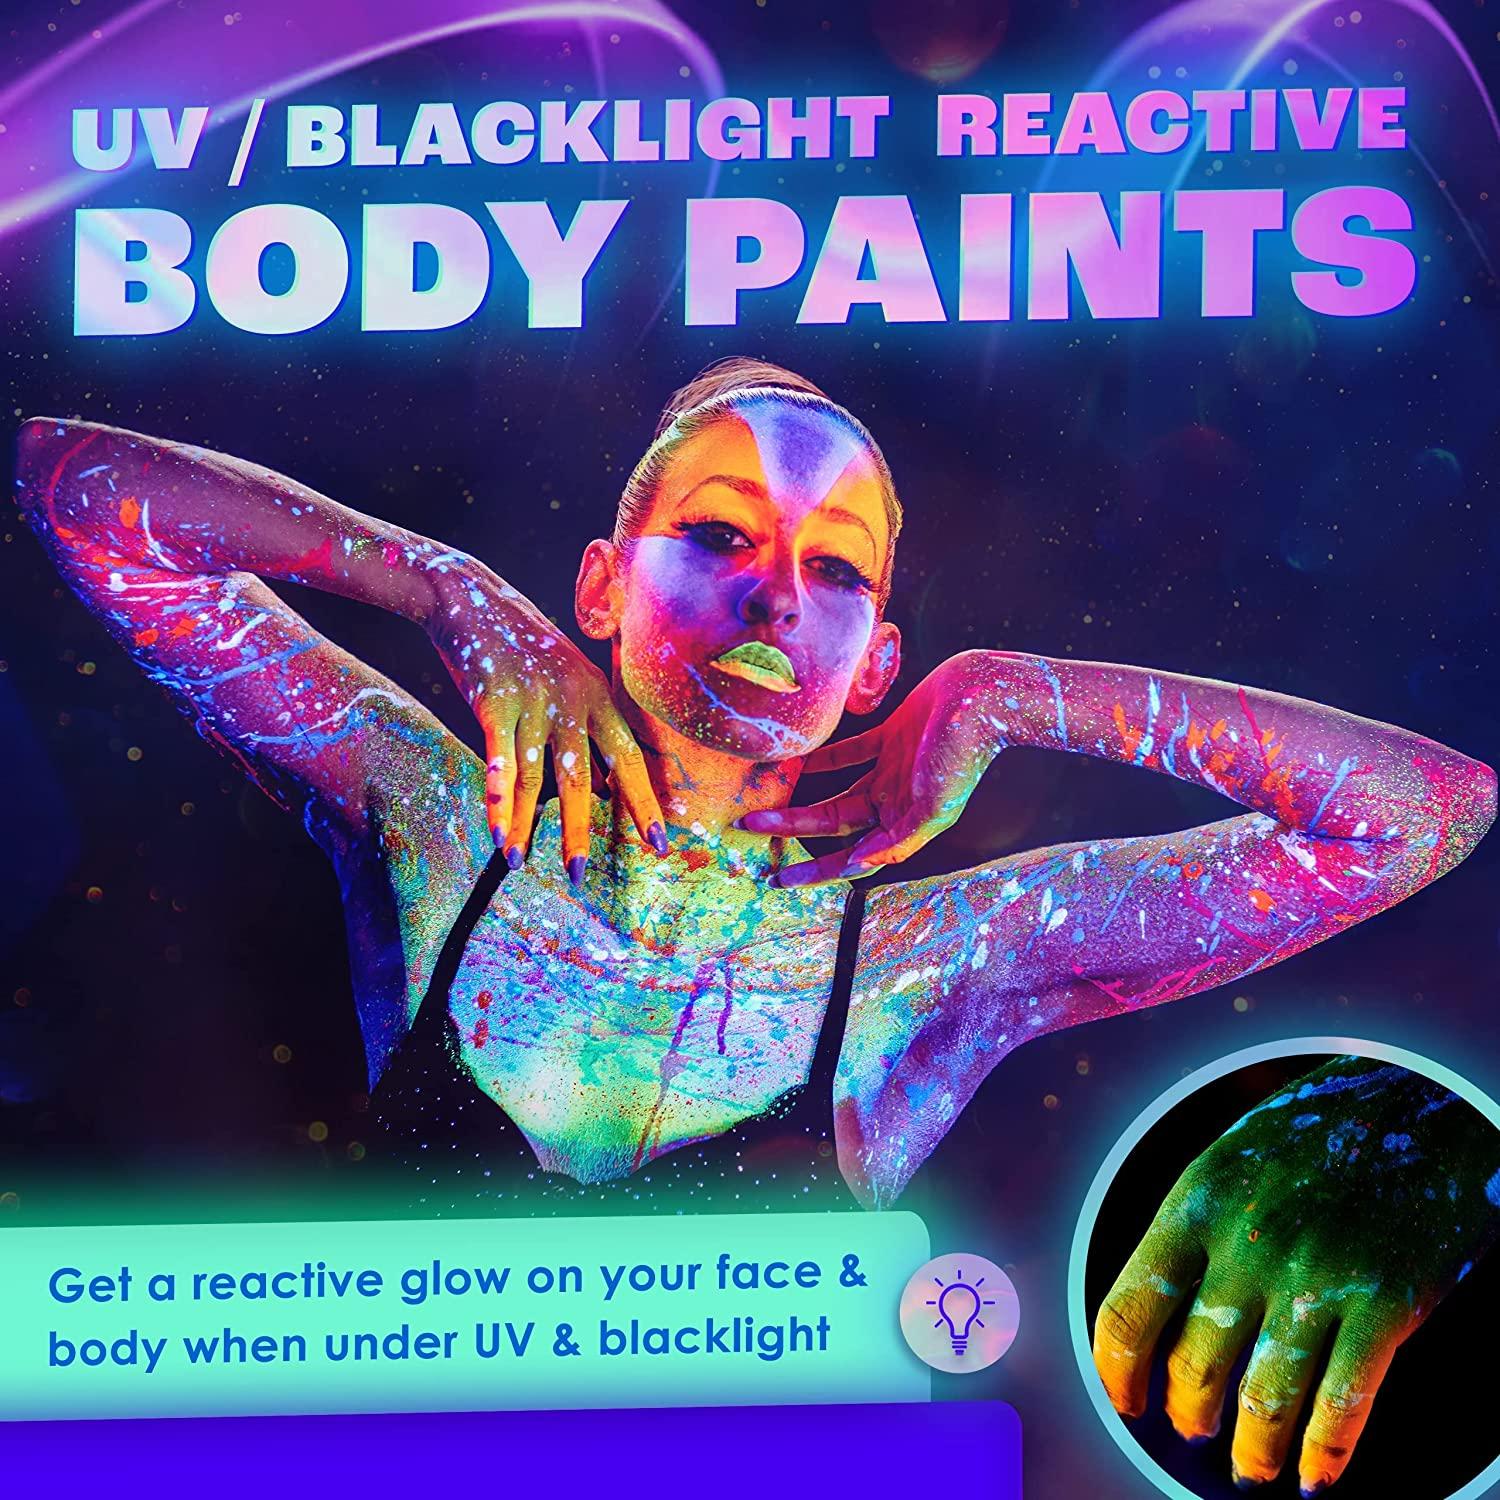 Neon Nights UV Body Paint Set, Blacklight Glow Makeup Kit, Fluorescent  Face Paints for Music Festivals, Photo Shoots, Nights Out - Easy to Use and  Remove, Premium Quality, Vibrant Colors